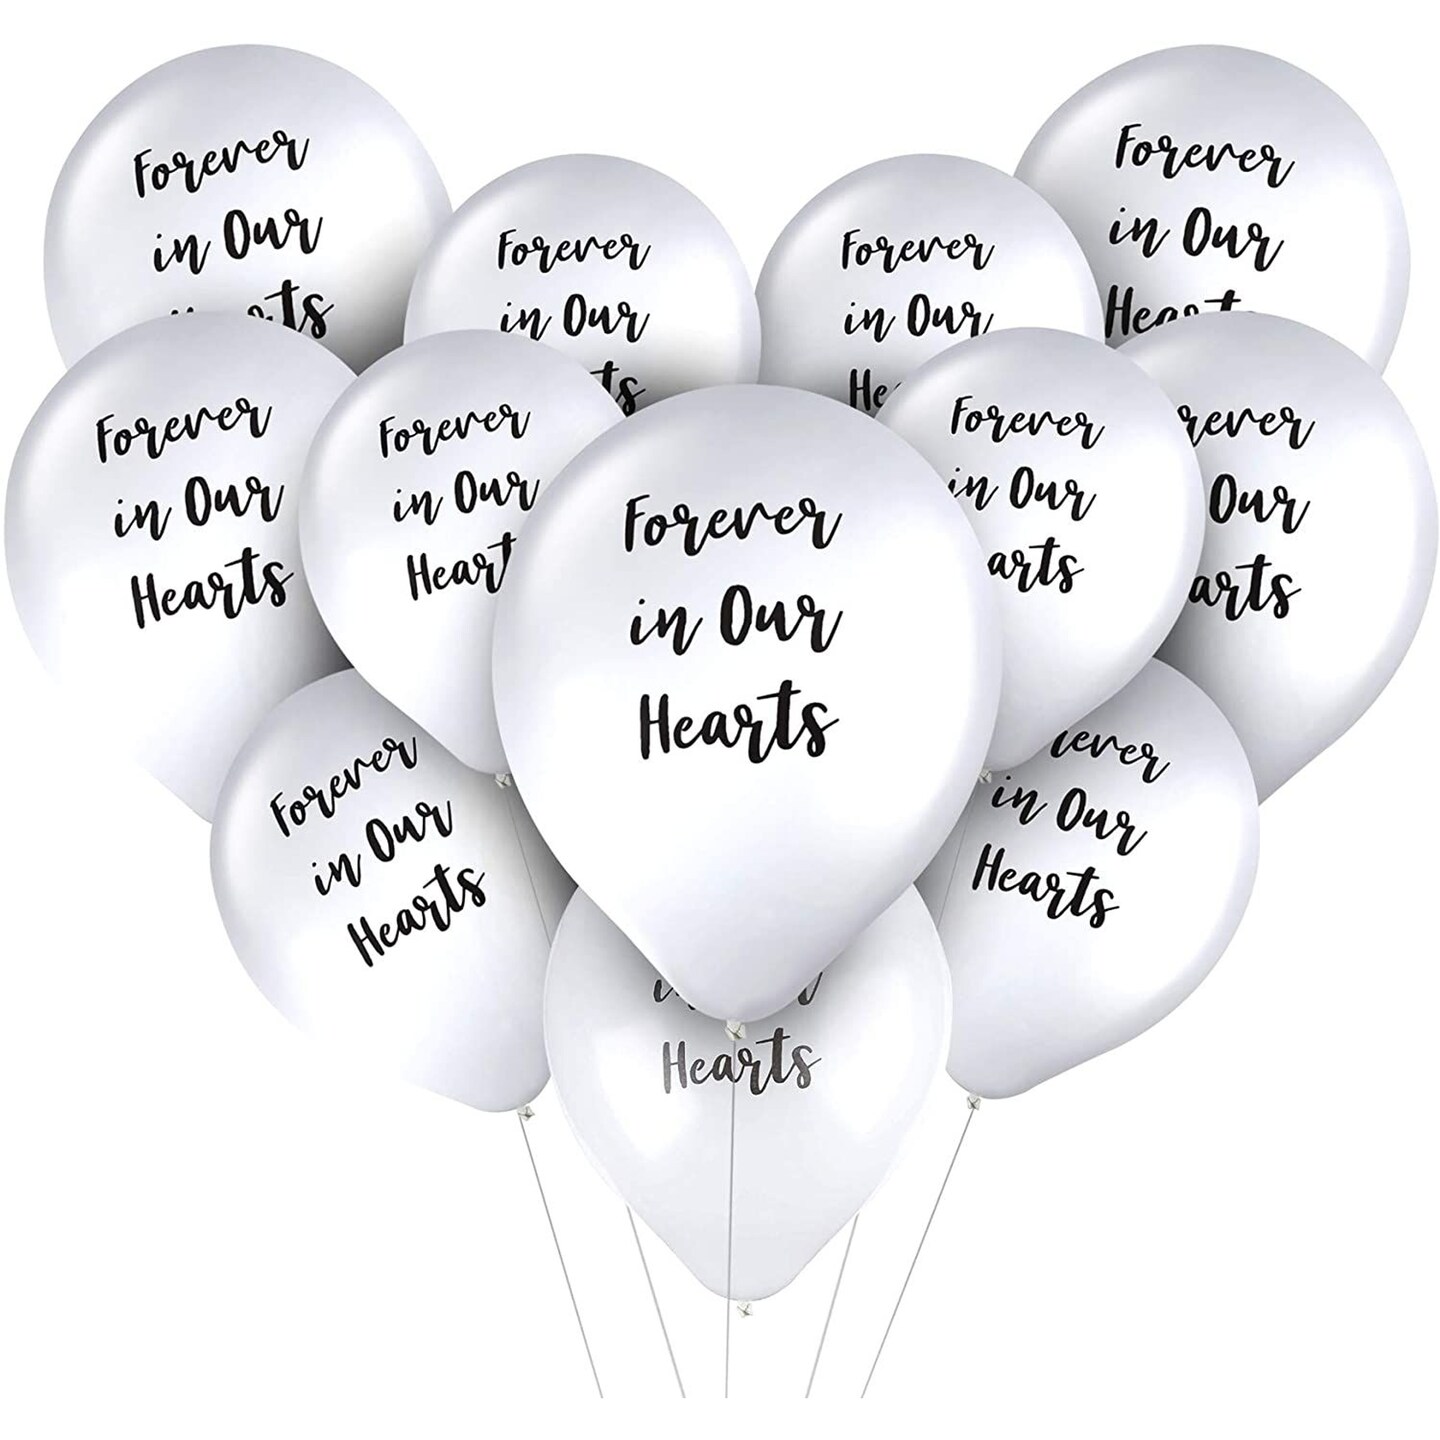 Memorial Balloons, Forever In Our Hearts (12 in., 30 Pack)